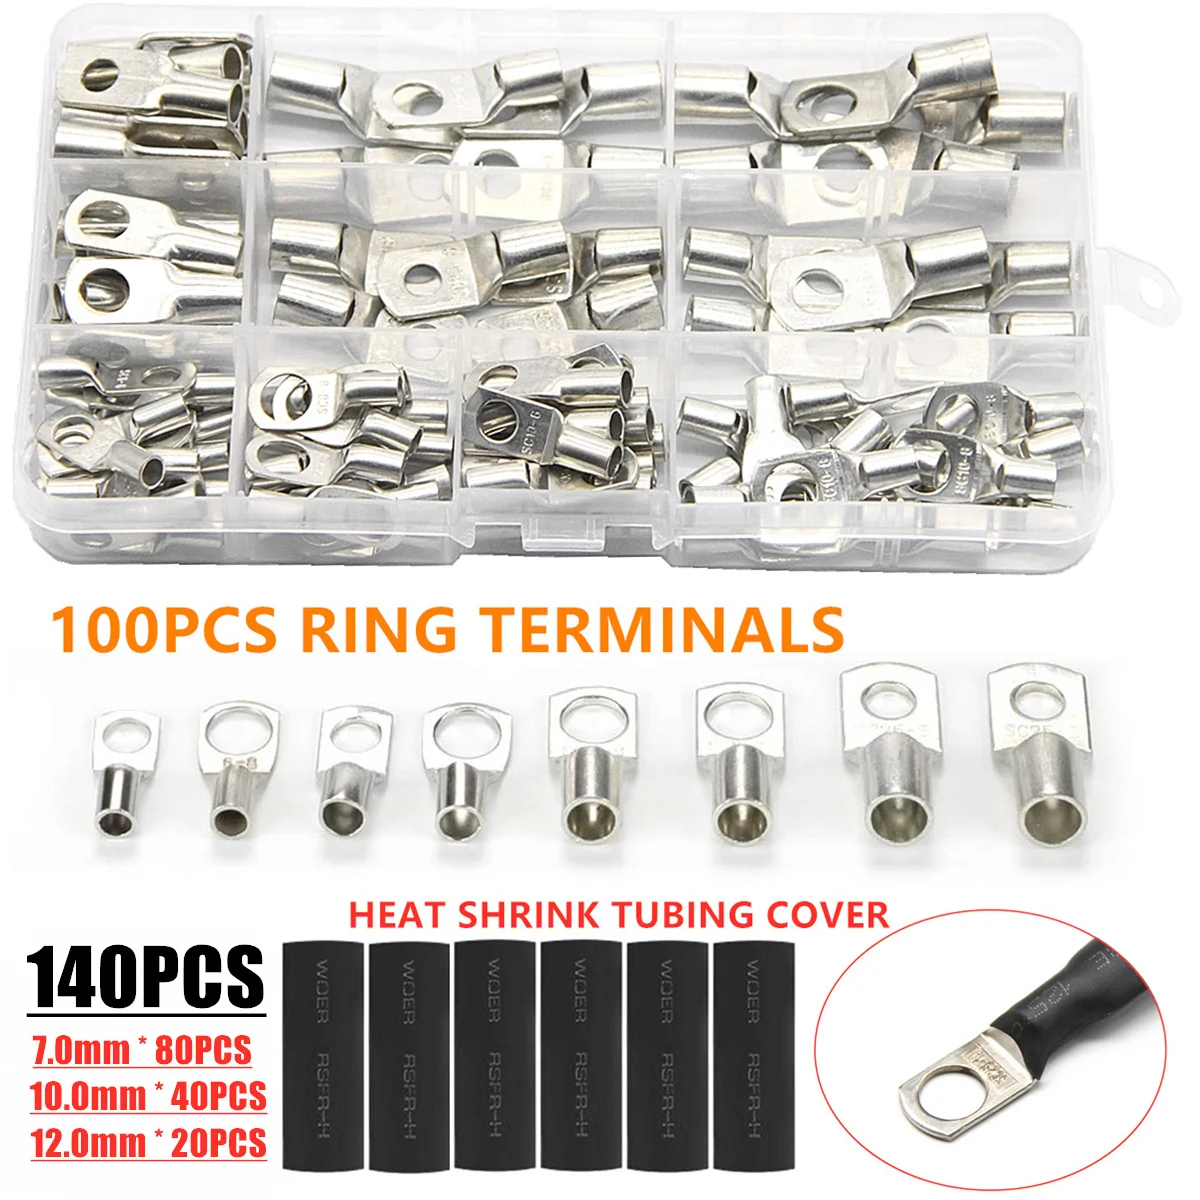 

240PCS SC Bare Terminals lug Tinned Copper Tube Lug Ring Seal Battery Wire Connectors Bare Cable Crimped/Soldered Terminal Kit